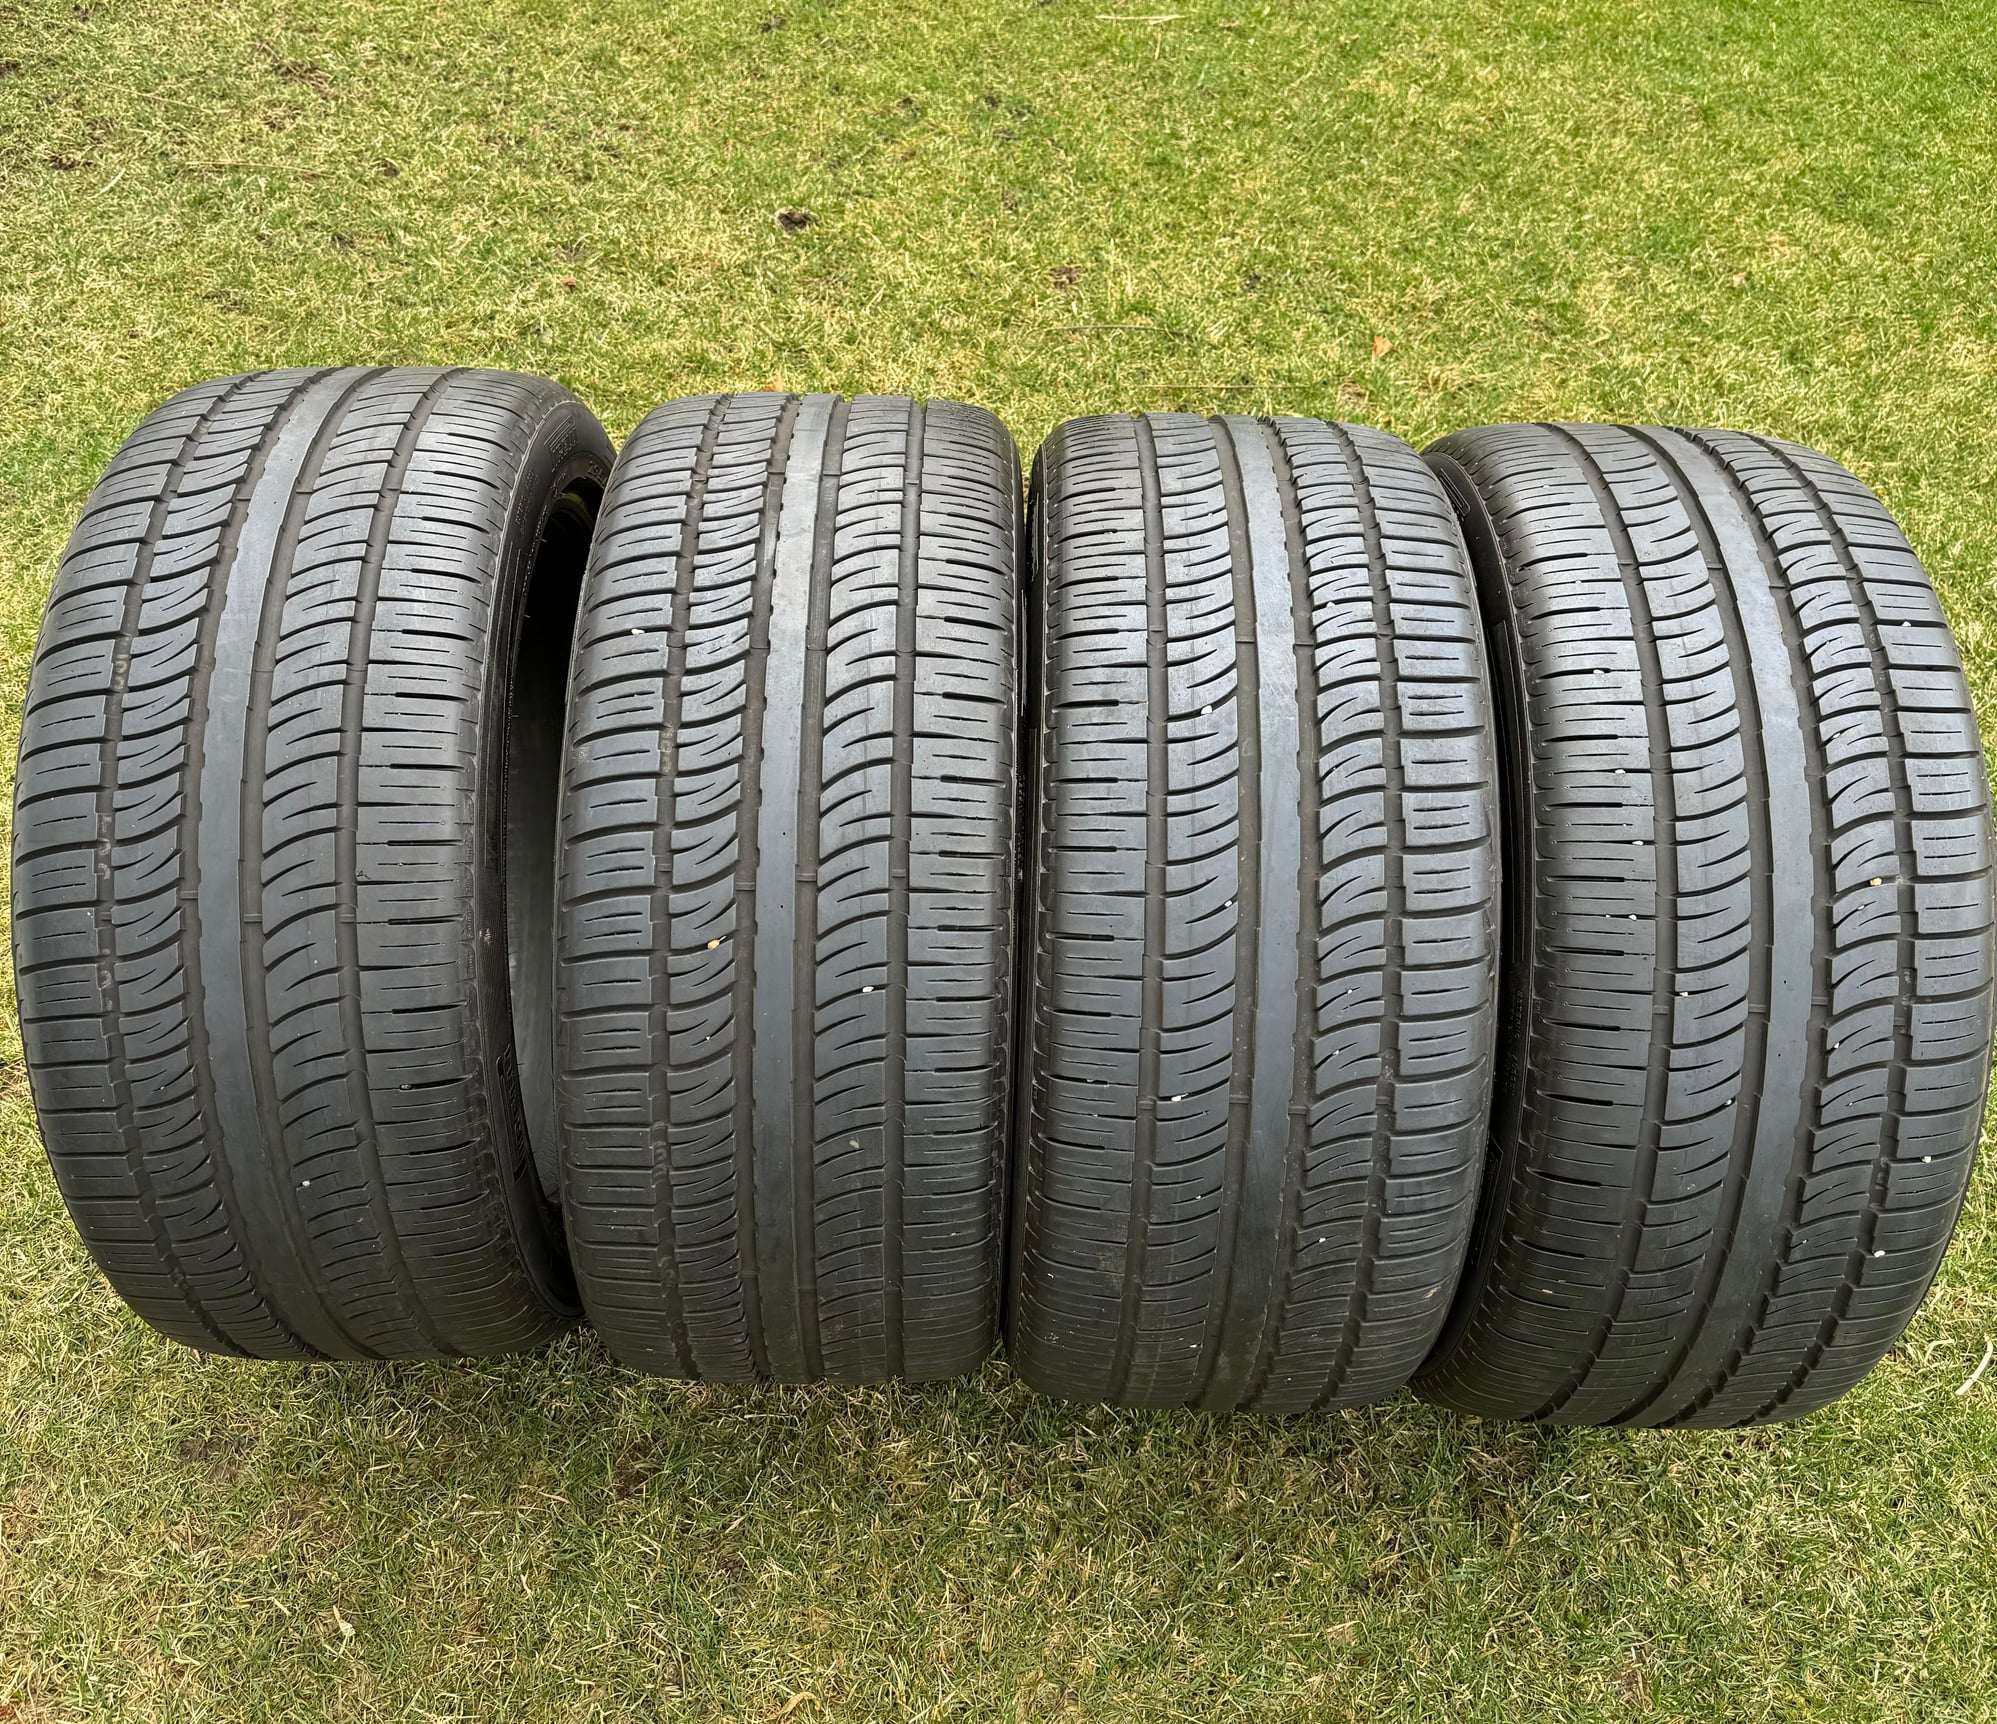 Wheels and Tires/Axles - 295/40/22 Pirelli Scorpion Zero Asimmetrico Summer Tires - 90% Tread - SAVE $$$ - Used - All Years  All Models - Plymouth, MN 55447, United States